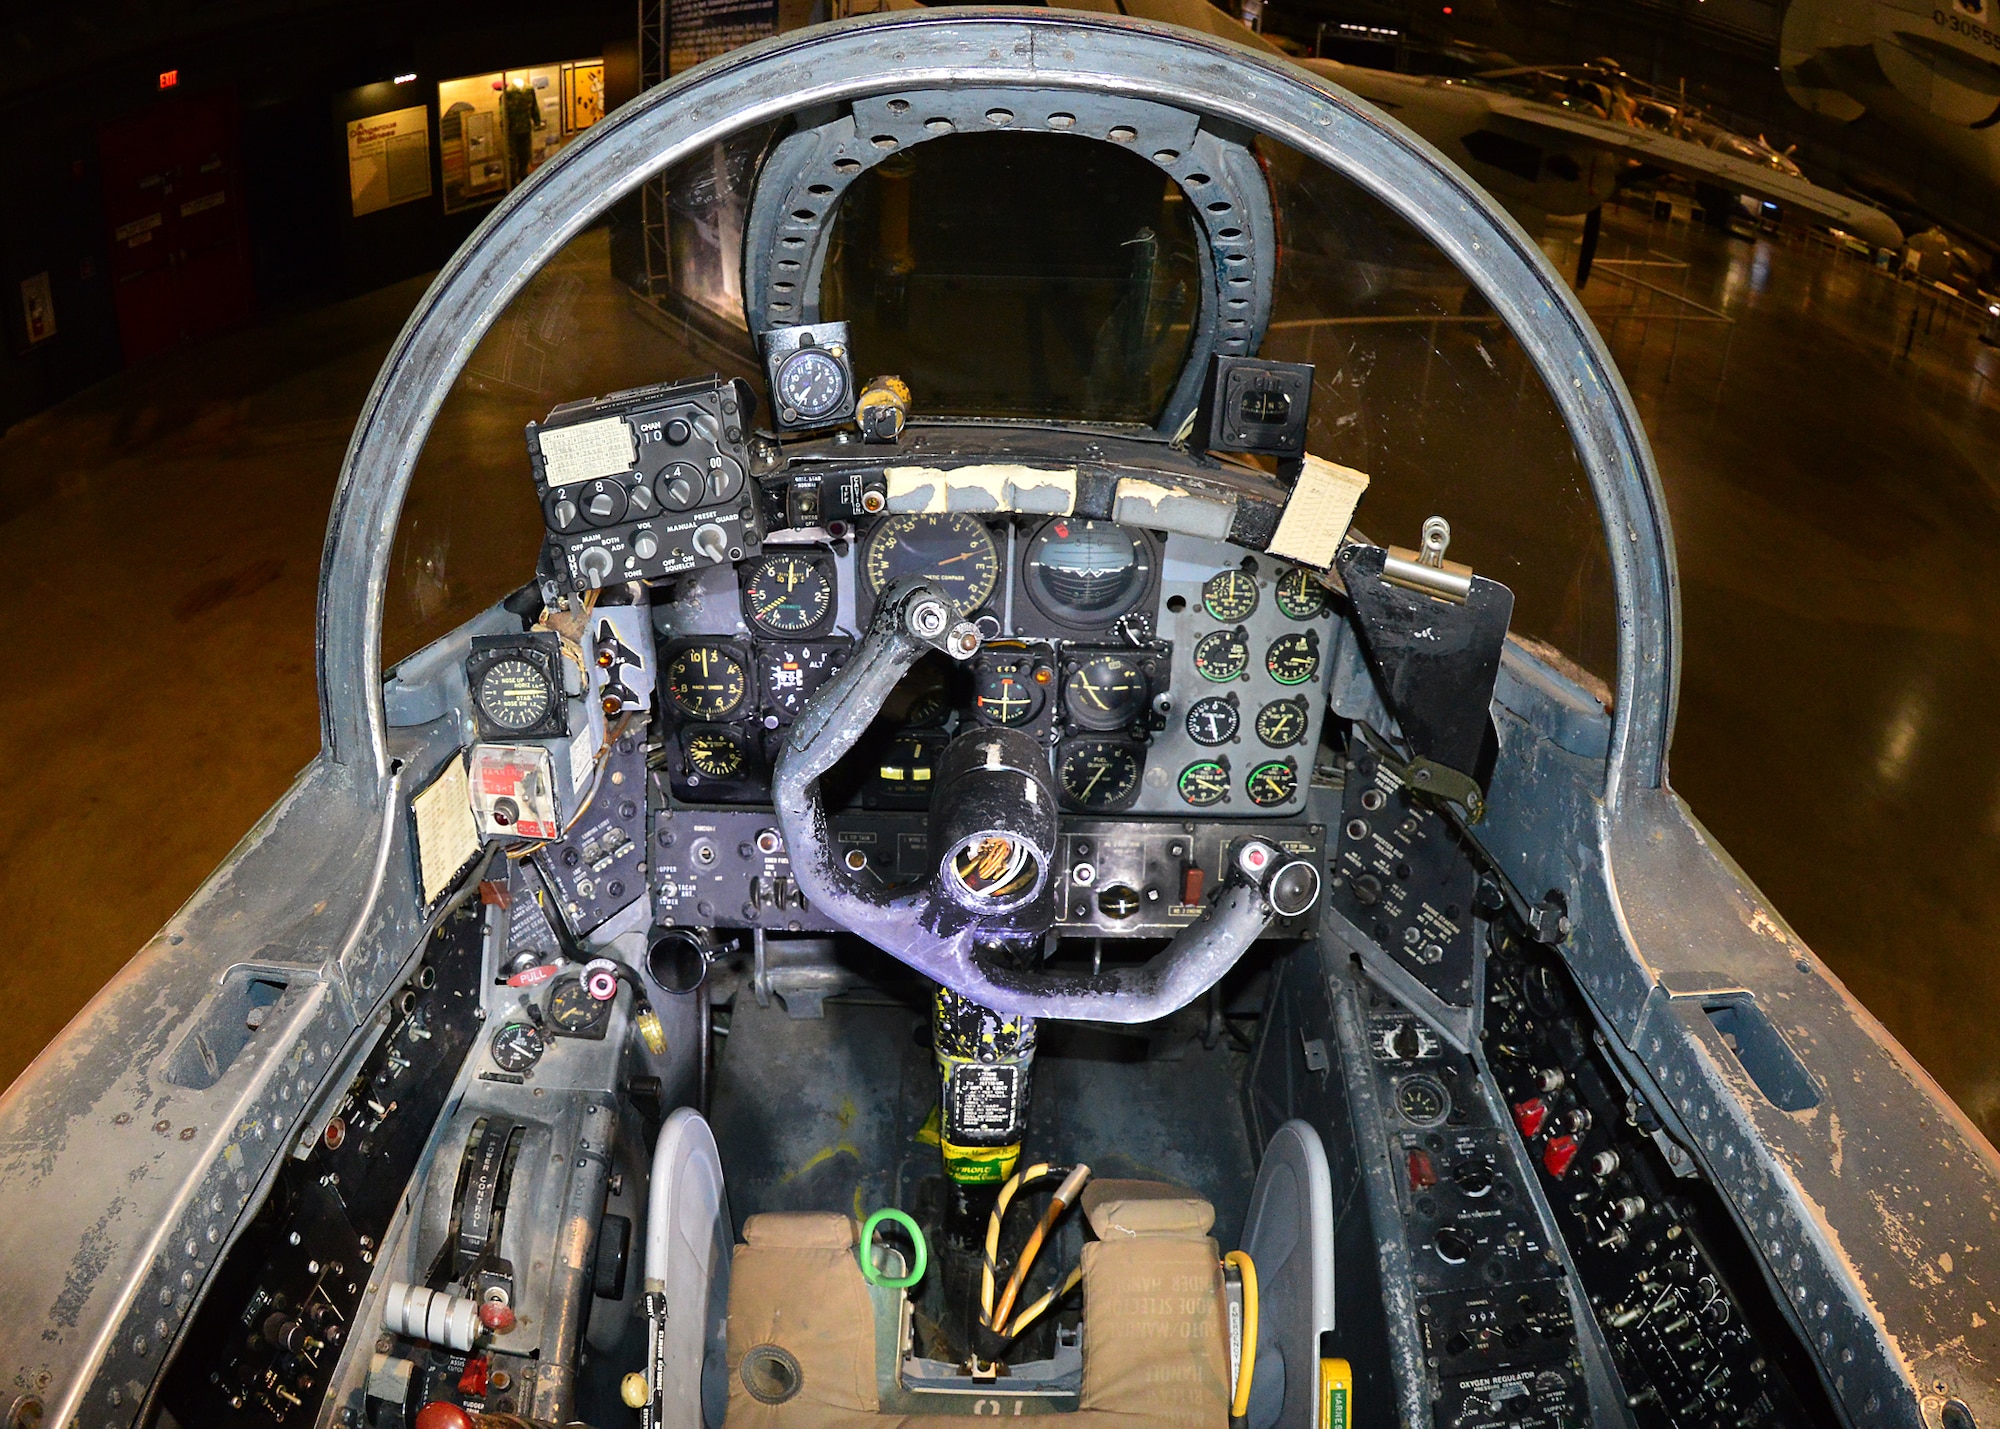 DAYTON, Ohio -- Martin B-57B Canberra front cockpit view in the Southeast Asia War Gallery at the National Museum of the U.S. Air Force. (U.S. Air Force photo by Ken LaRock)